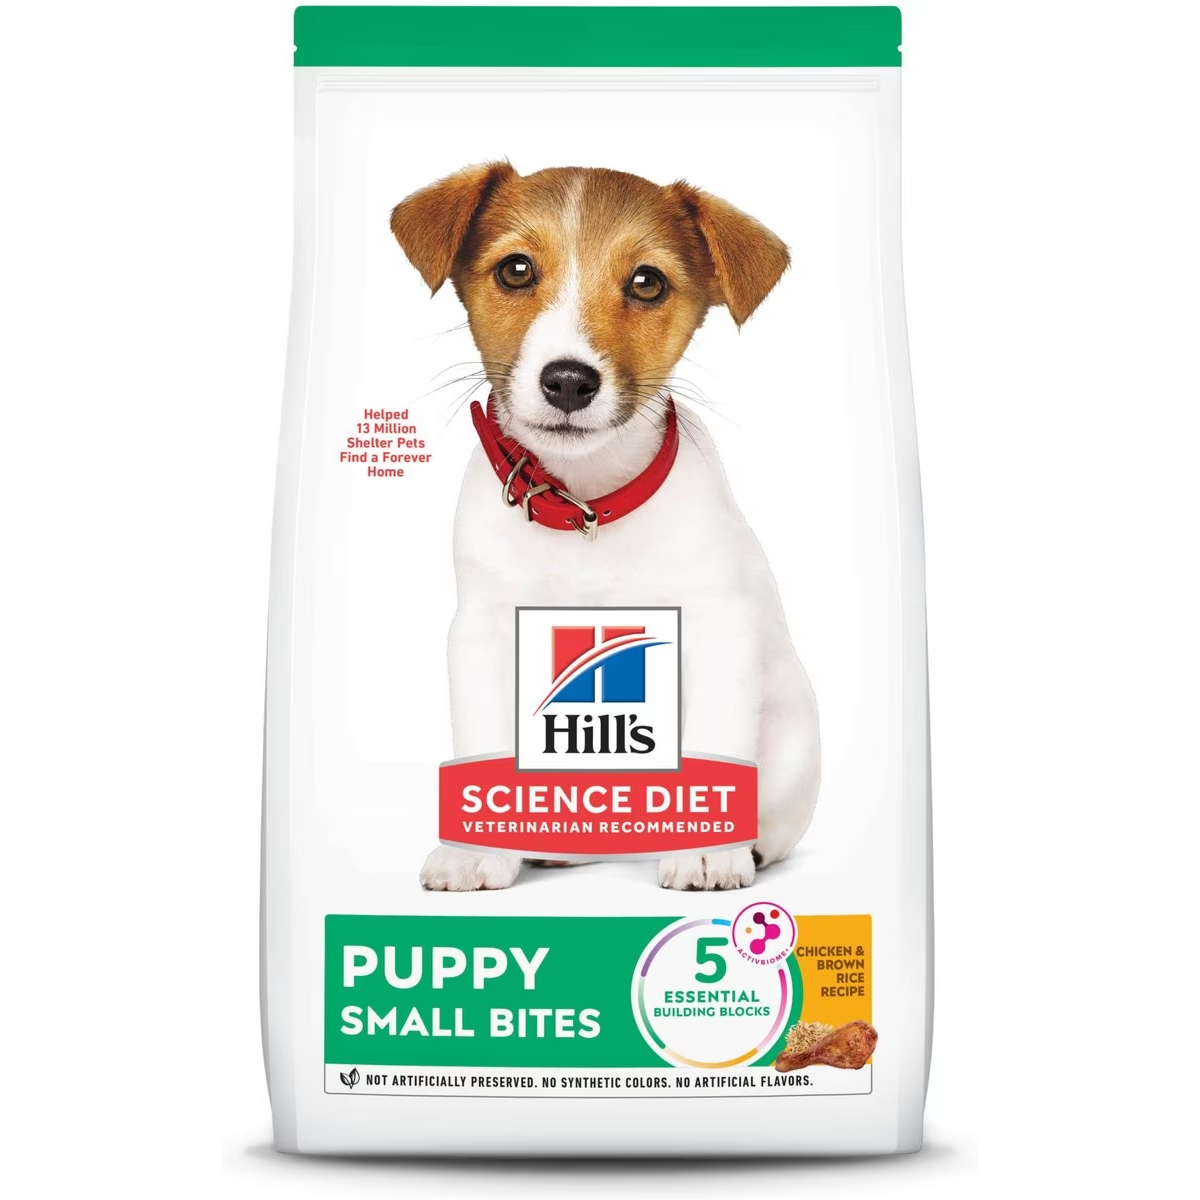 Hill’s Science Diet Small Bites Dog Food